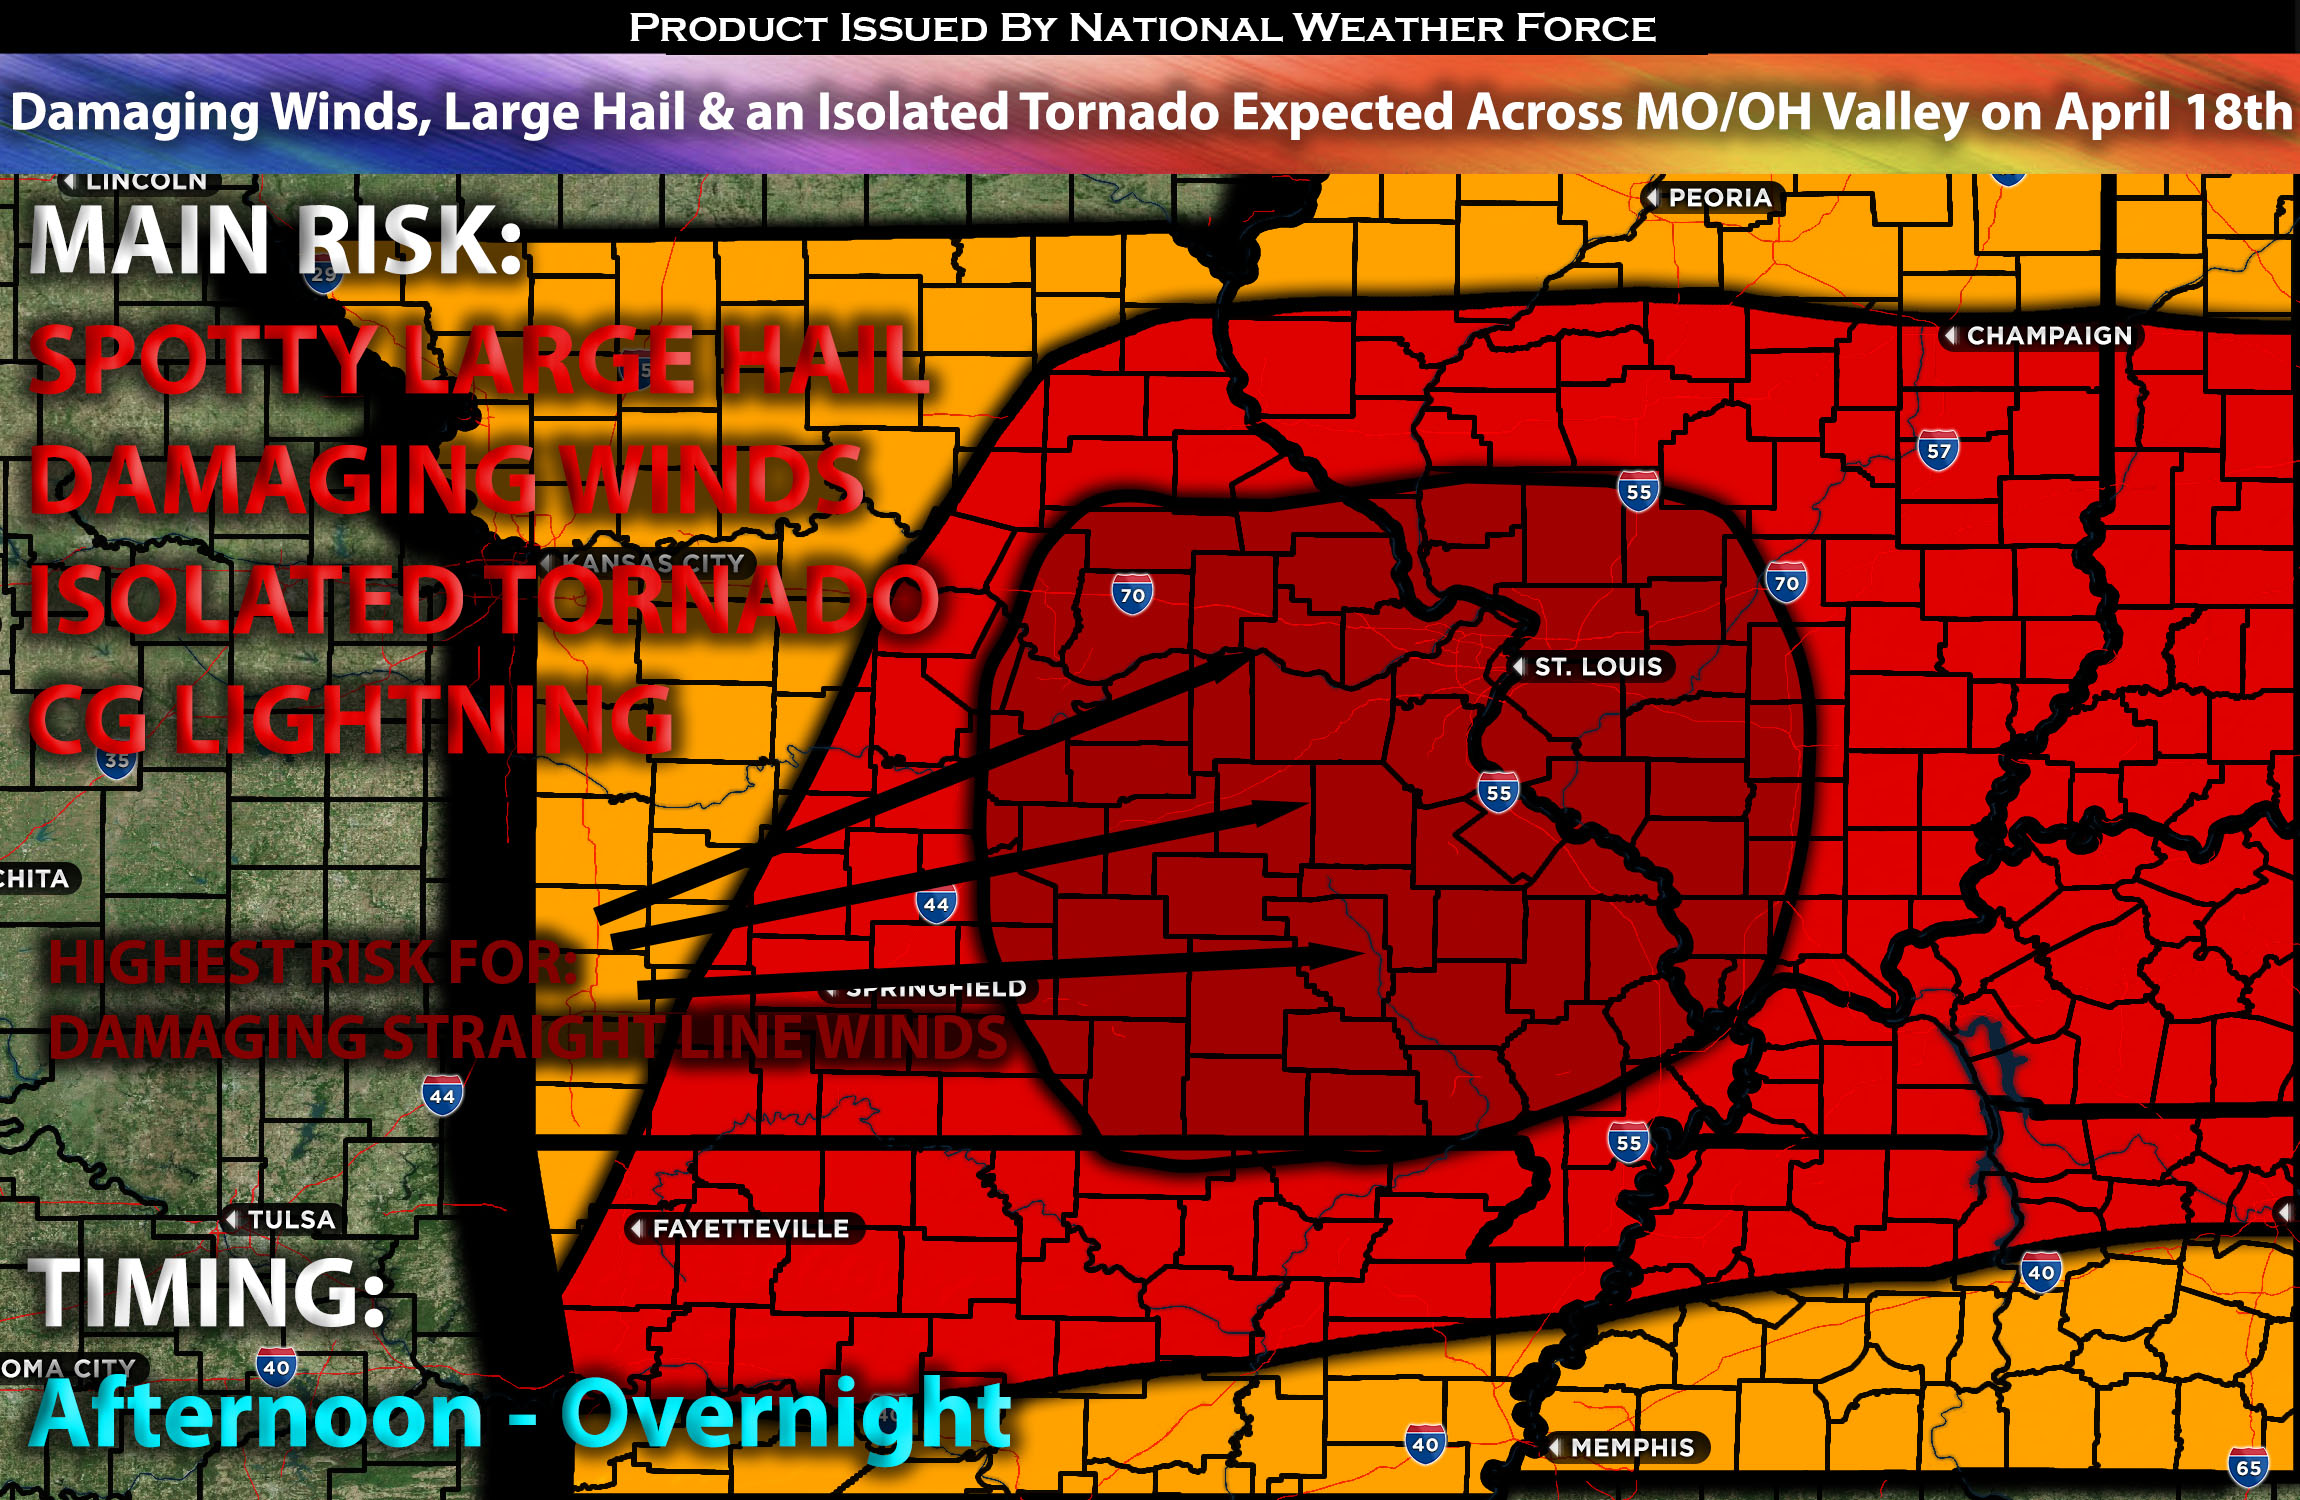 Damaging Winds, Large Hail & Isolated Tornadoes Expected Across MO/OH Valley on April 18th